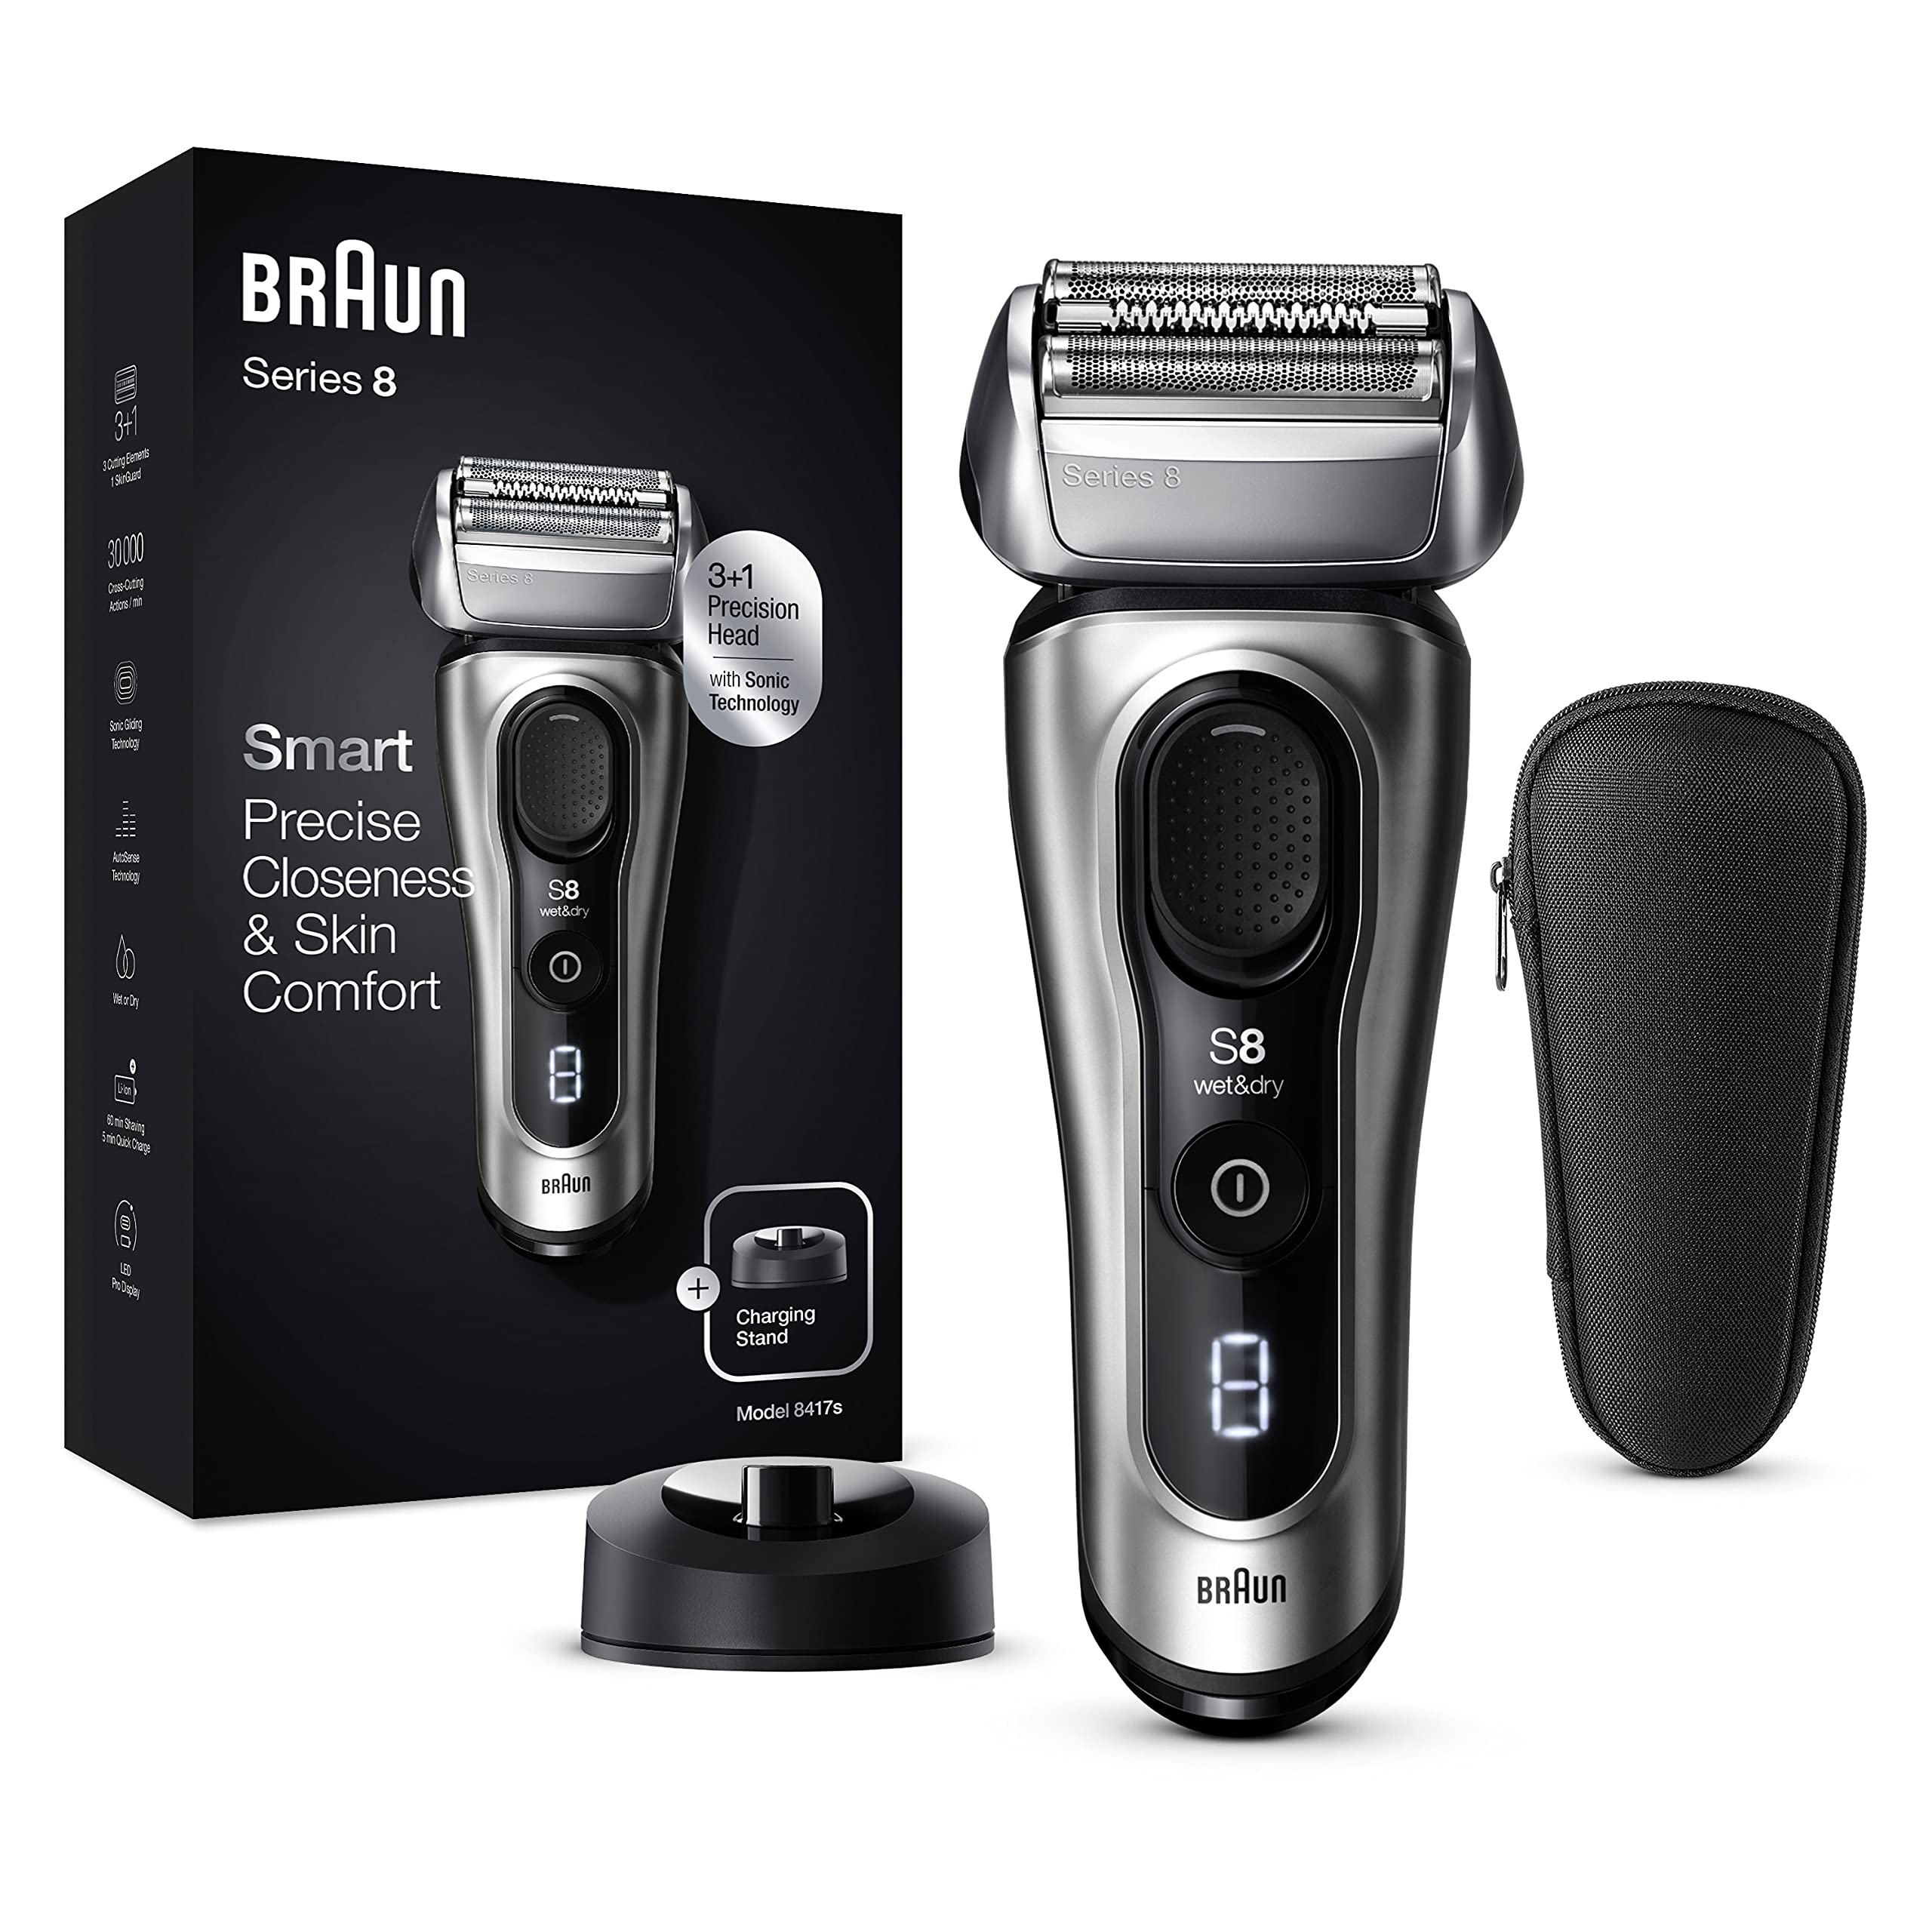 Braun Series 7020s Flex Electric Razor for Men with Precision Trimmer, Wet ＆ Dry, Rechargeable, Cordless Foil Shaver, Silver並行輸入 - 4